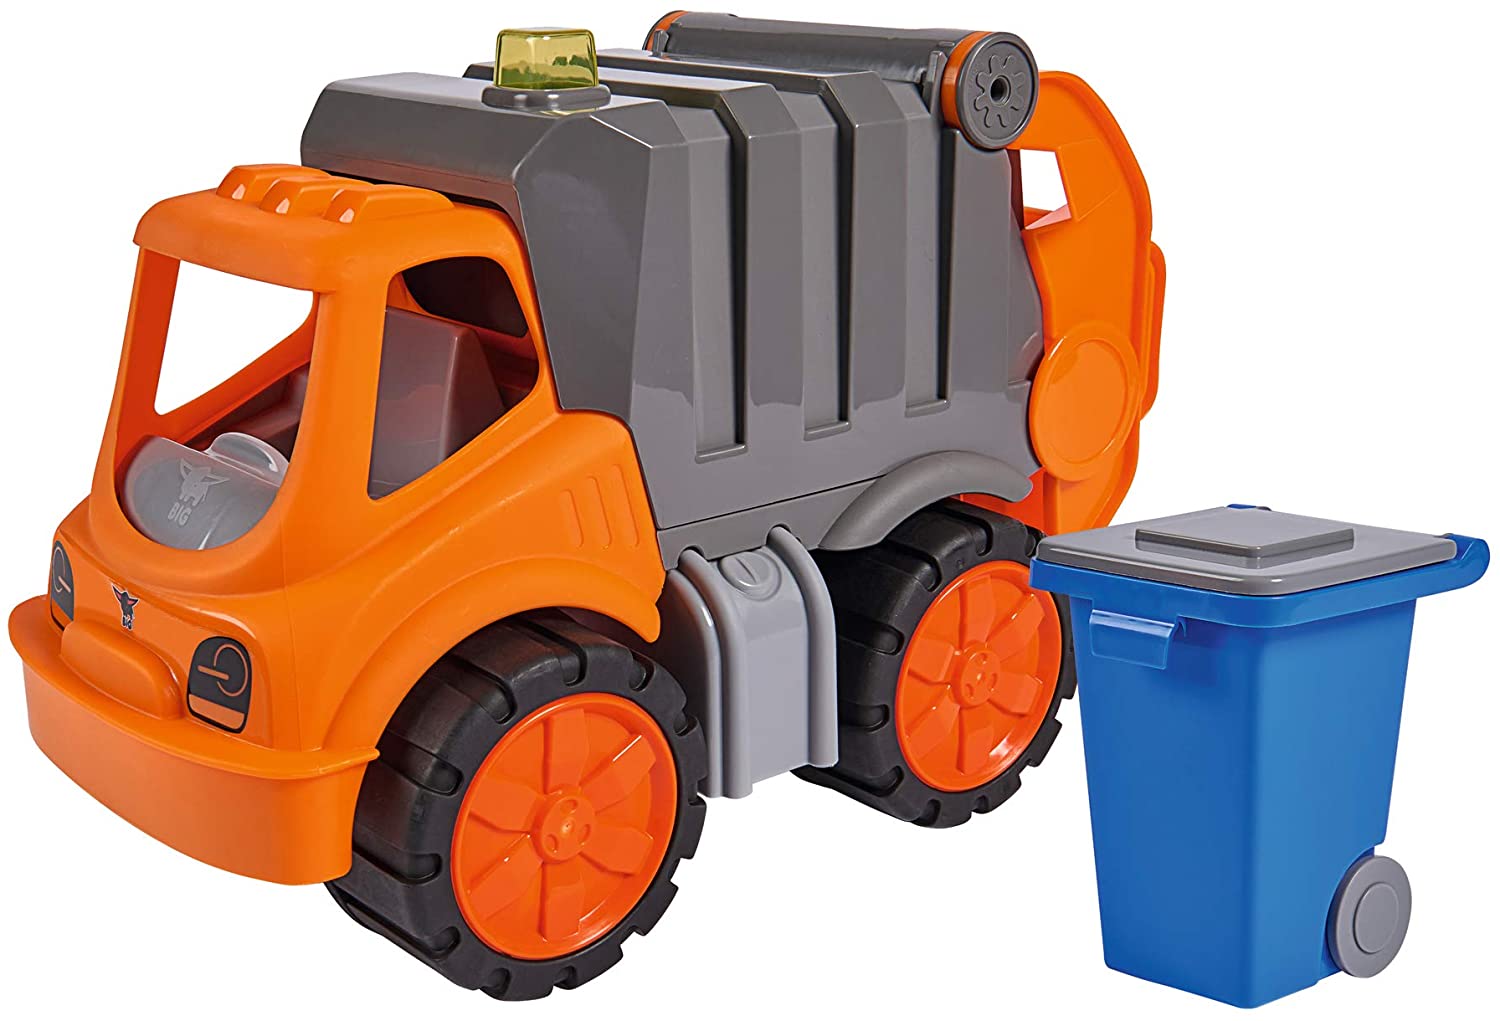 Big Power-Worker Wheelie Bin Toy Car Ideal For On The Go Tyres Made Of Soft